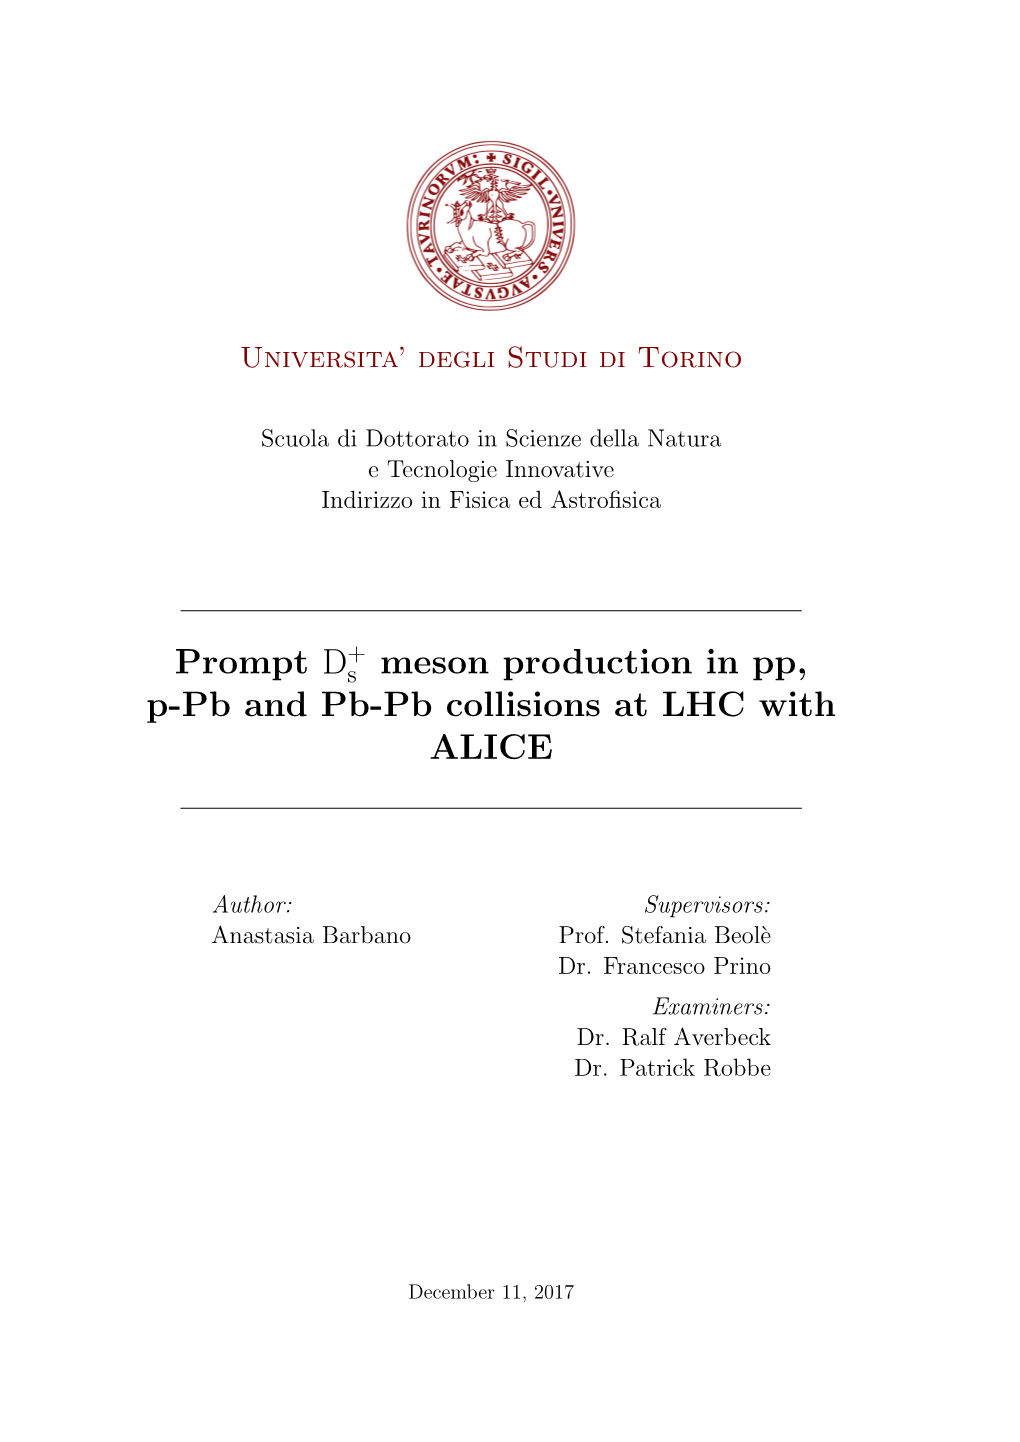 Prompt D Meson Production in Pp, P-Pb and Pb-Pb Collisions at LHC